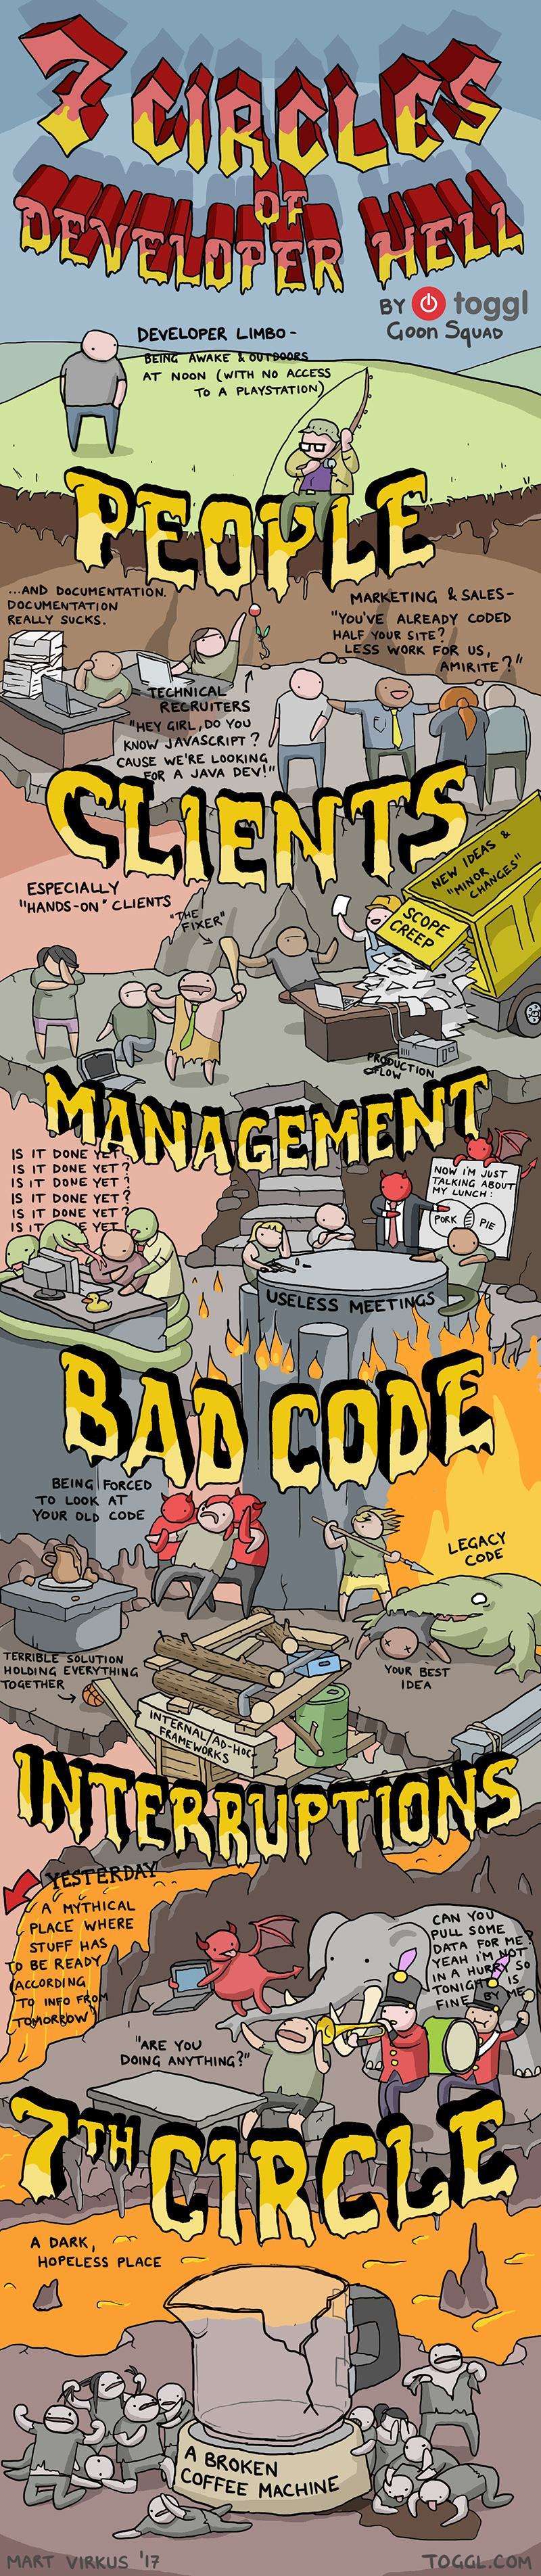 The Seven Circles of Developer Hell